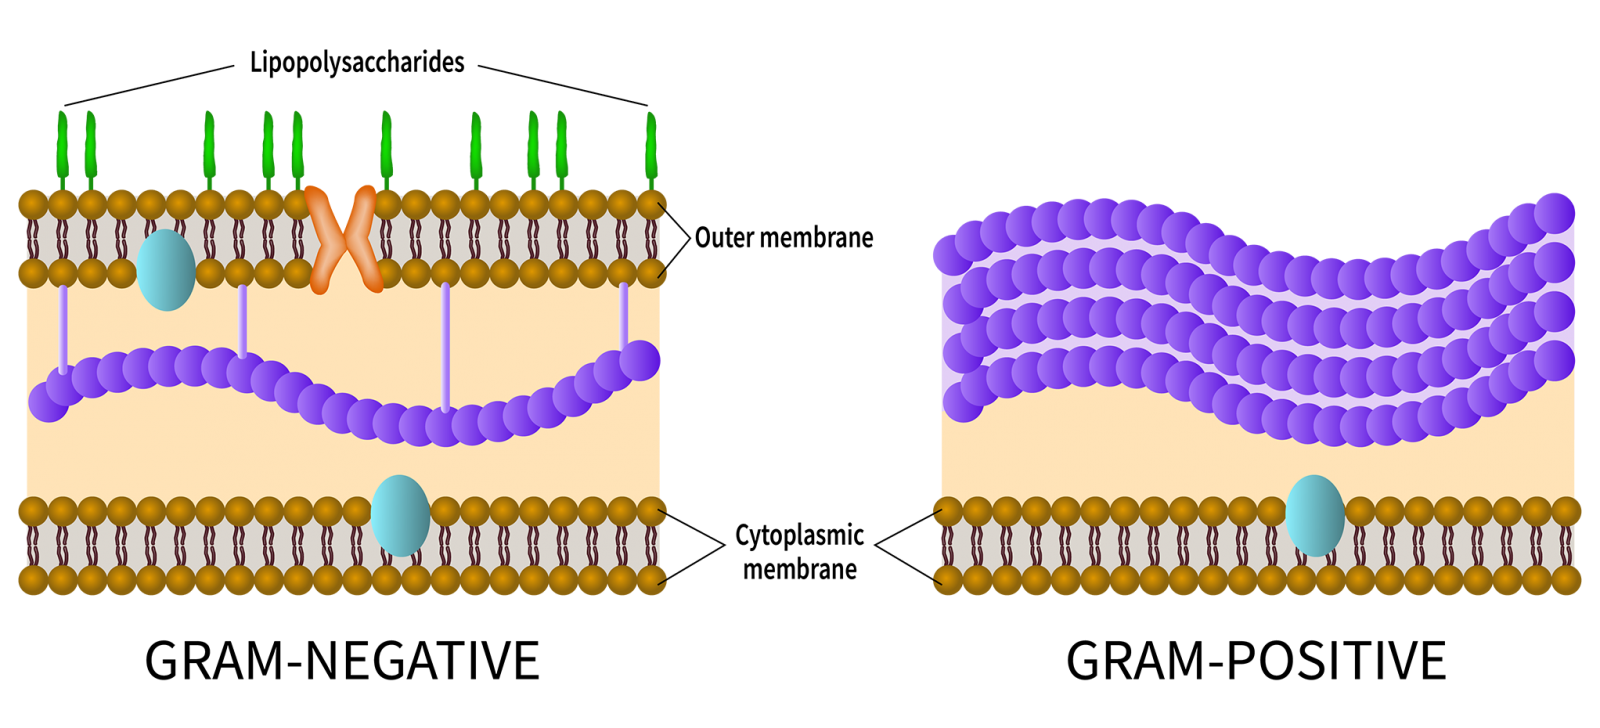 Comparison of gram-positive and gram-negative bacterial cell walls